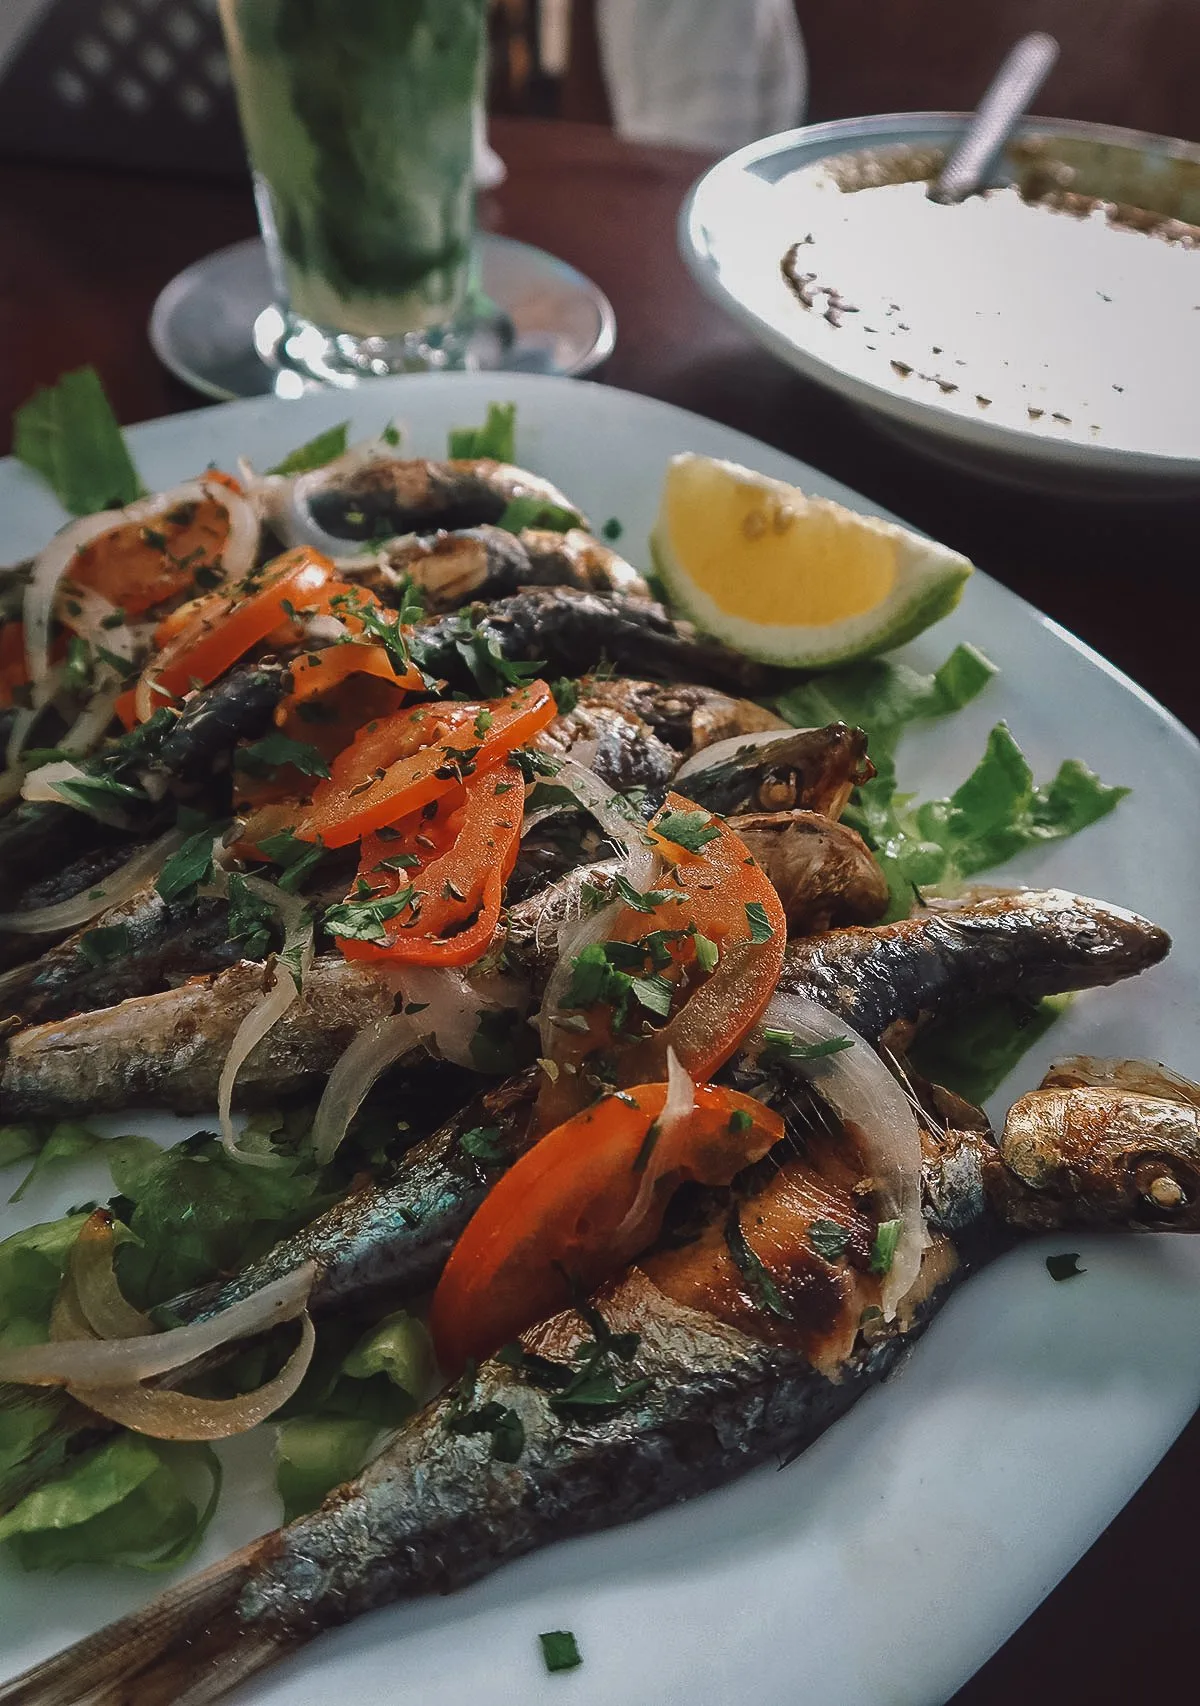 Grilled sardines at a restaurant in Tangier